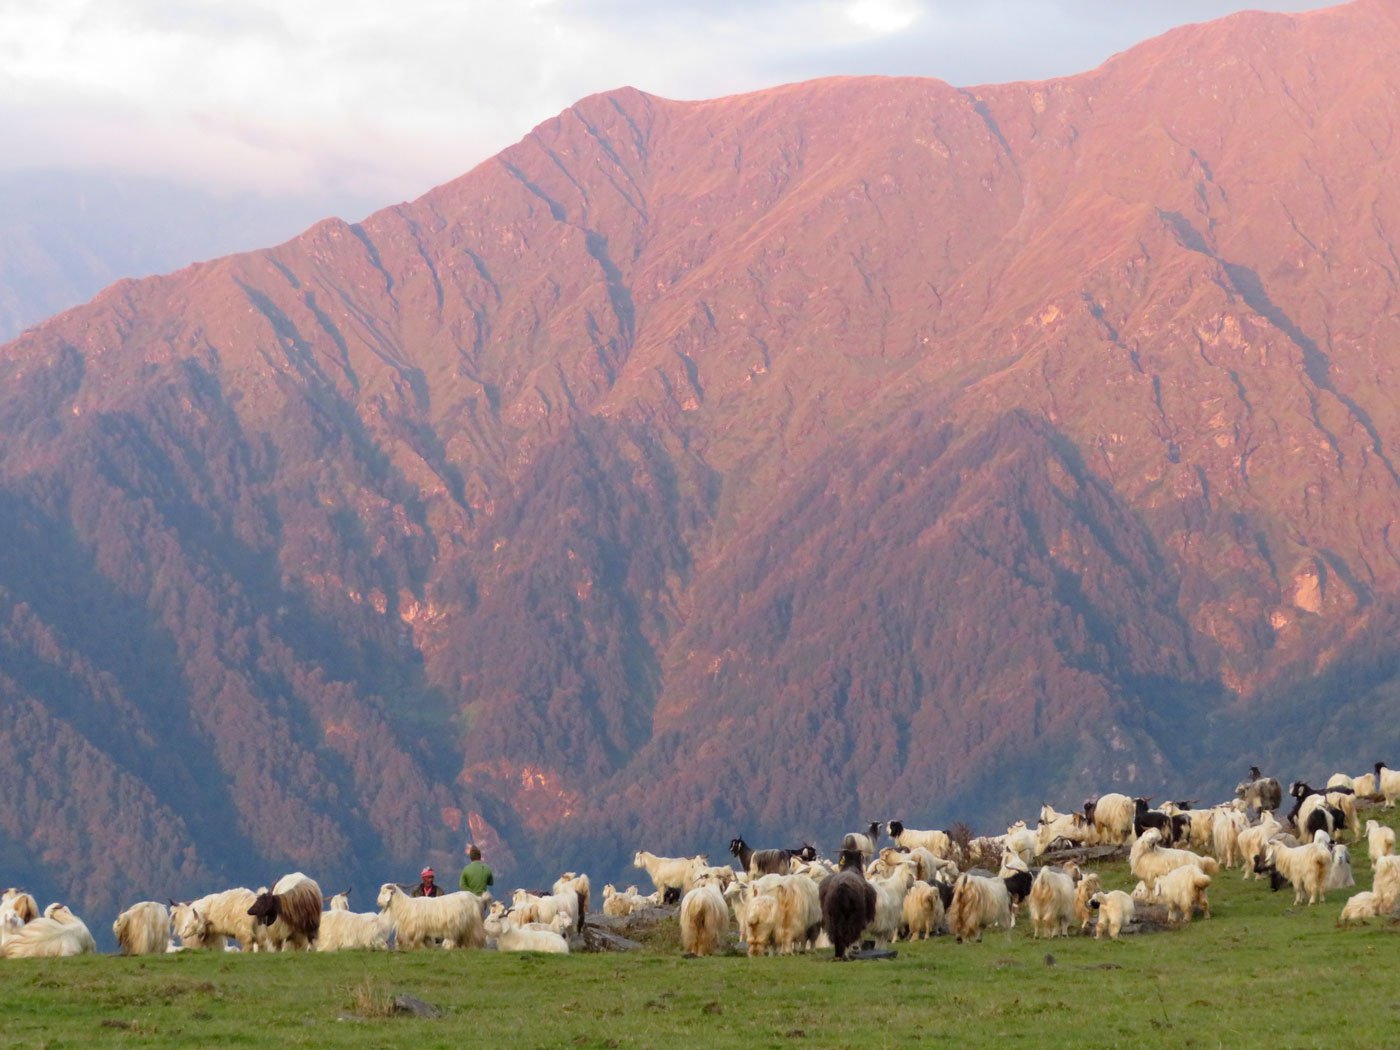 The shepherds at work, minding their animals, as the sun rises on the Gangotri range in the background